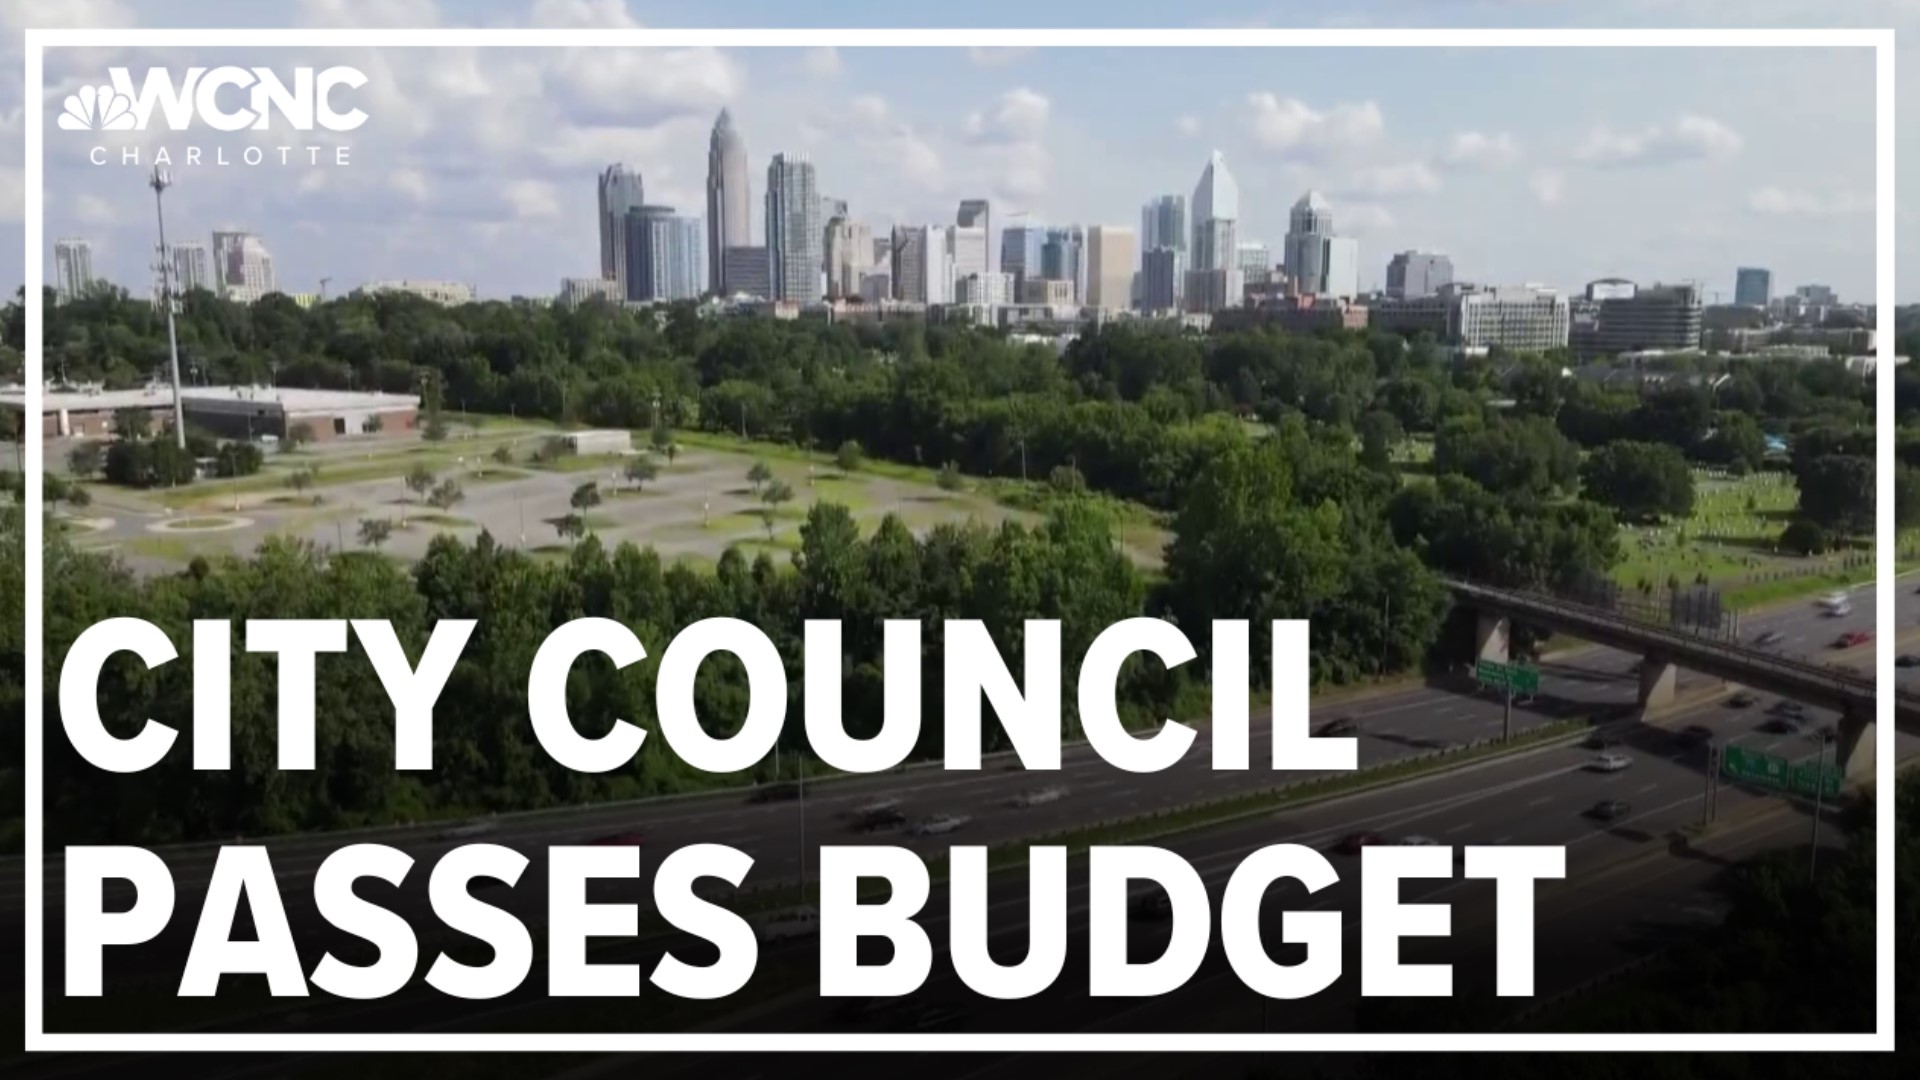 Charlotte City Council passed the city's $3.3 billion budget in its Monday night meeting.